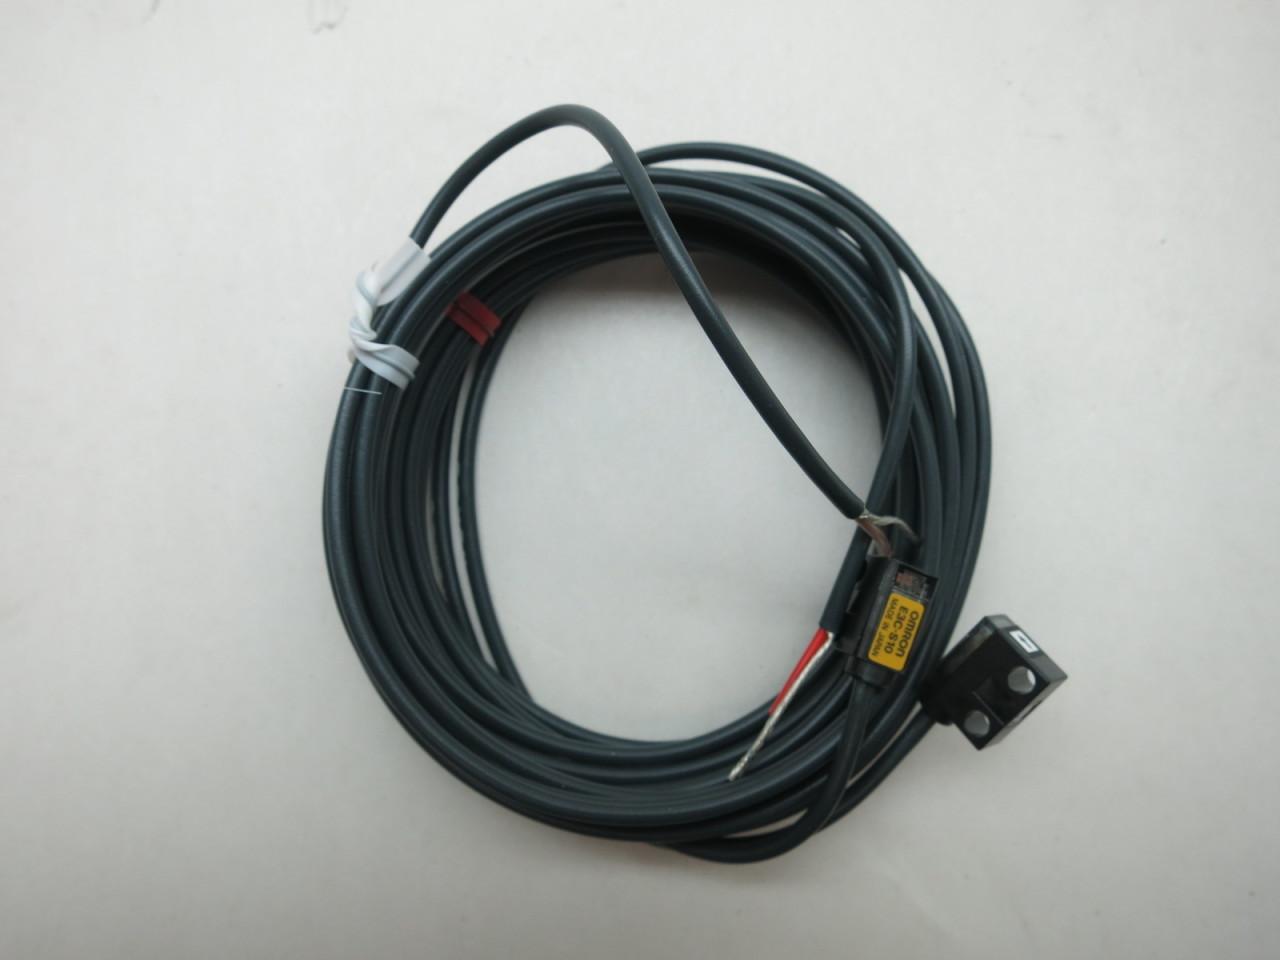 For Omron E3C-S10 photoelectric switch sensor 